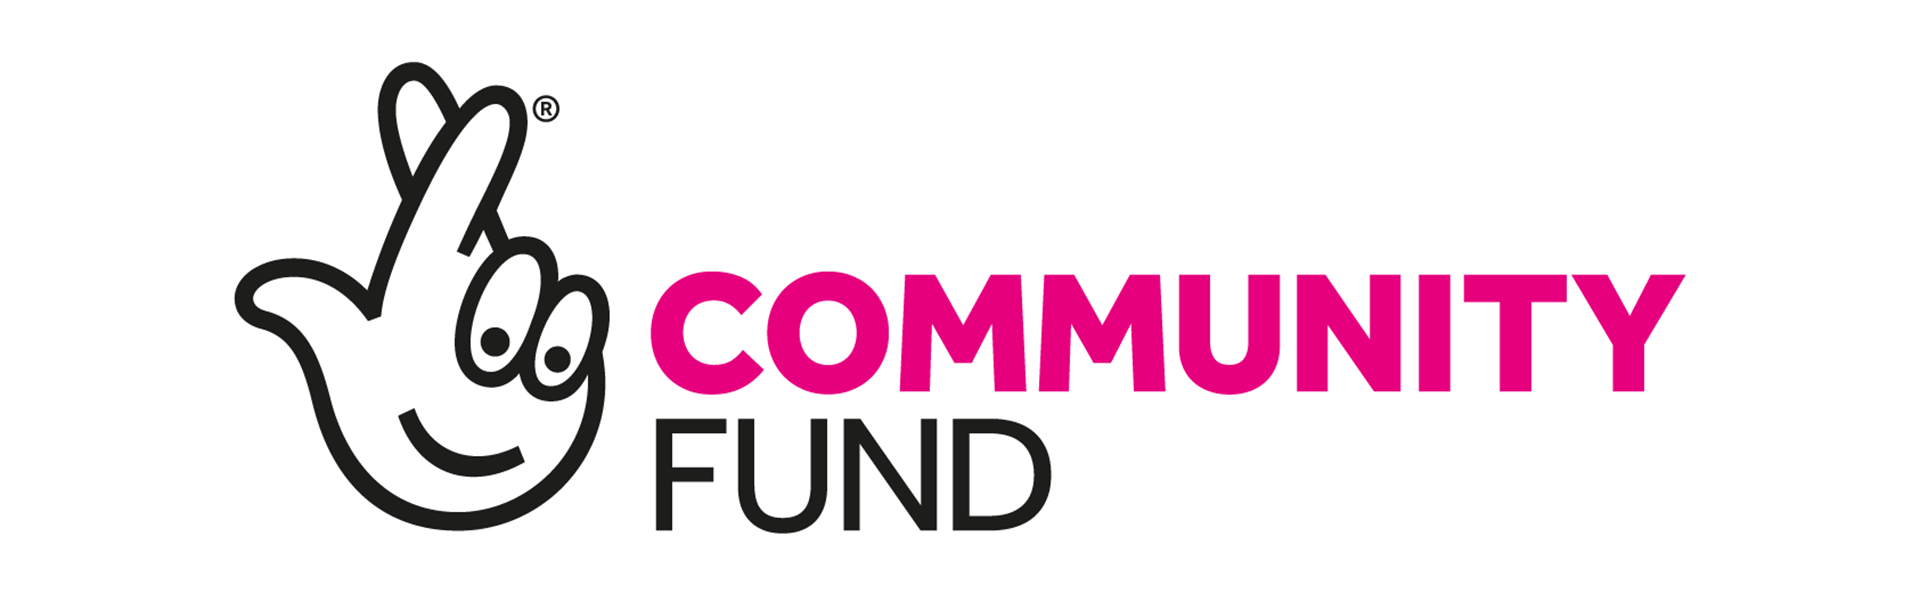 Thank you to The National Lottery Community Fund for their support